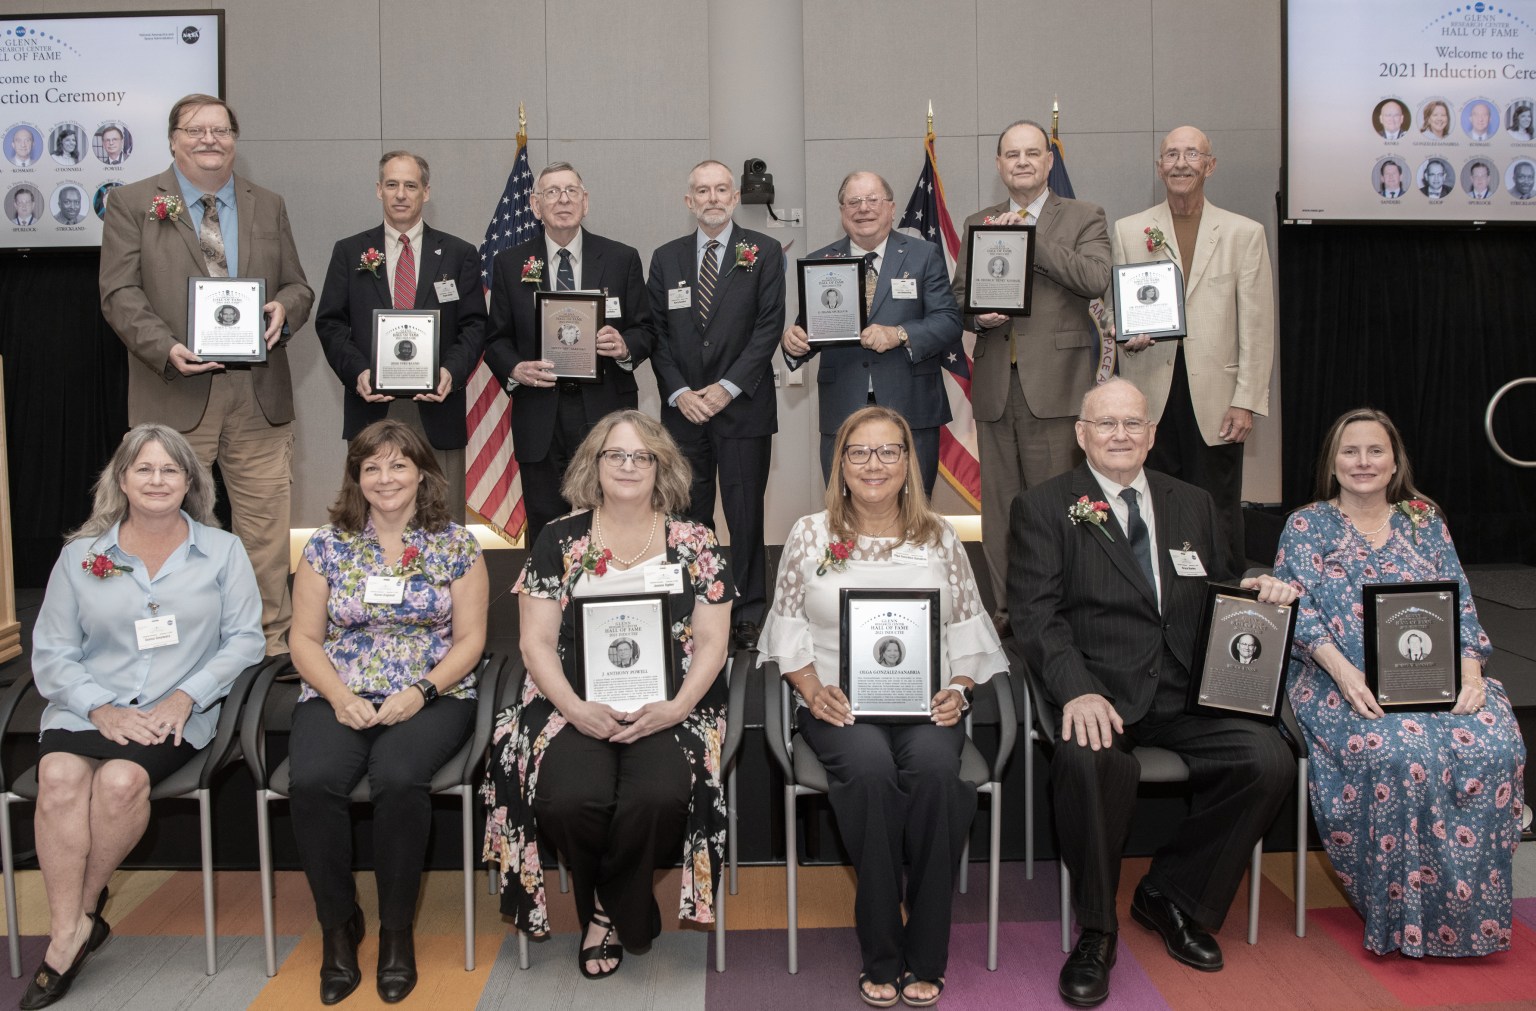 Group of people posing for photograph with plaques.